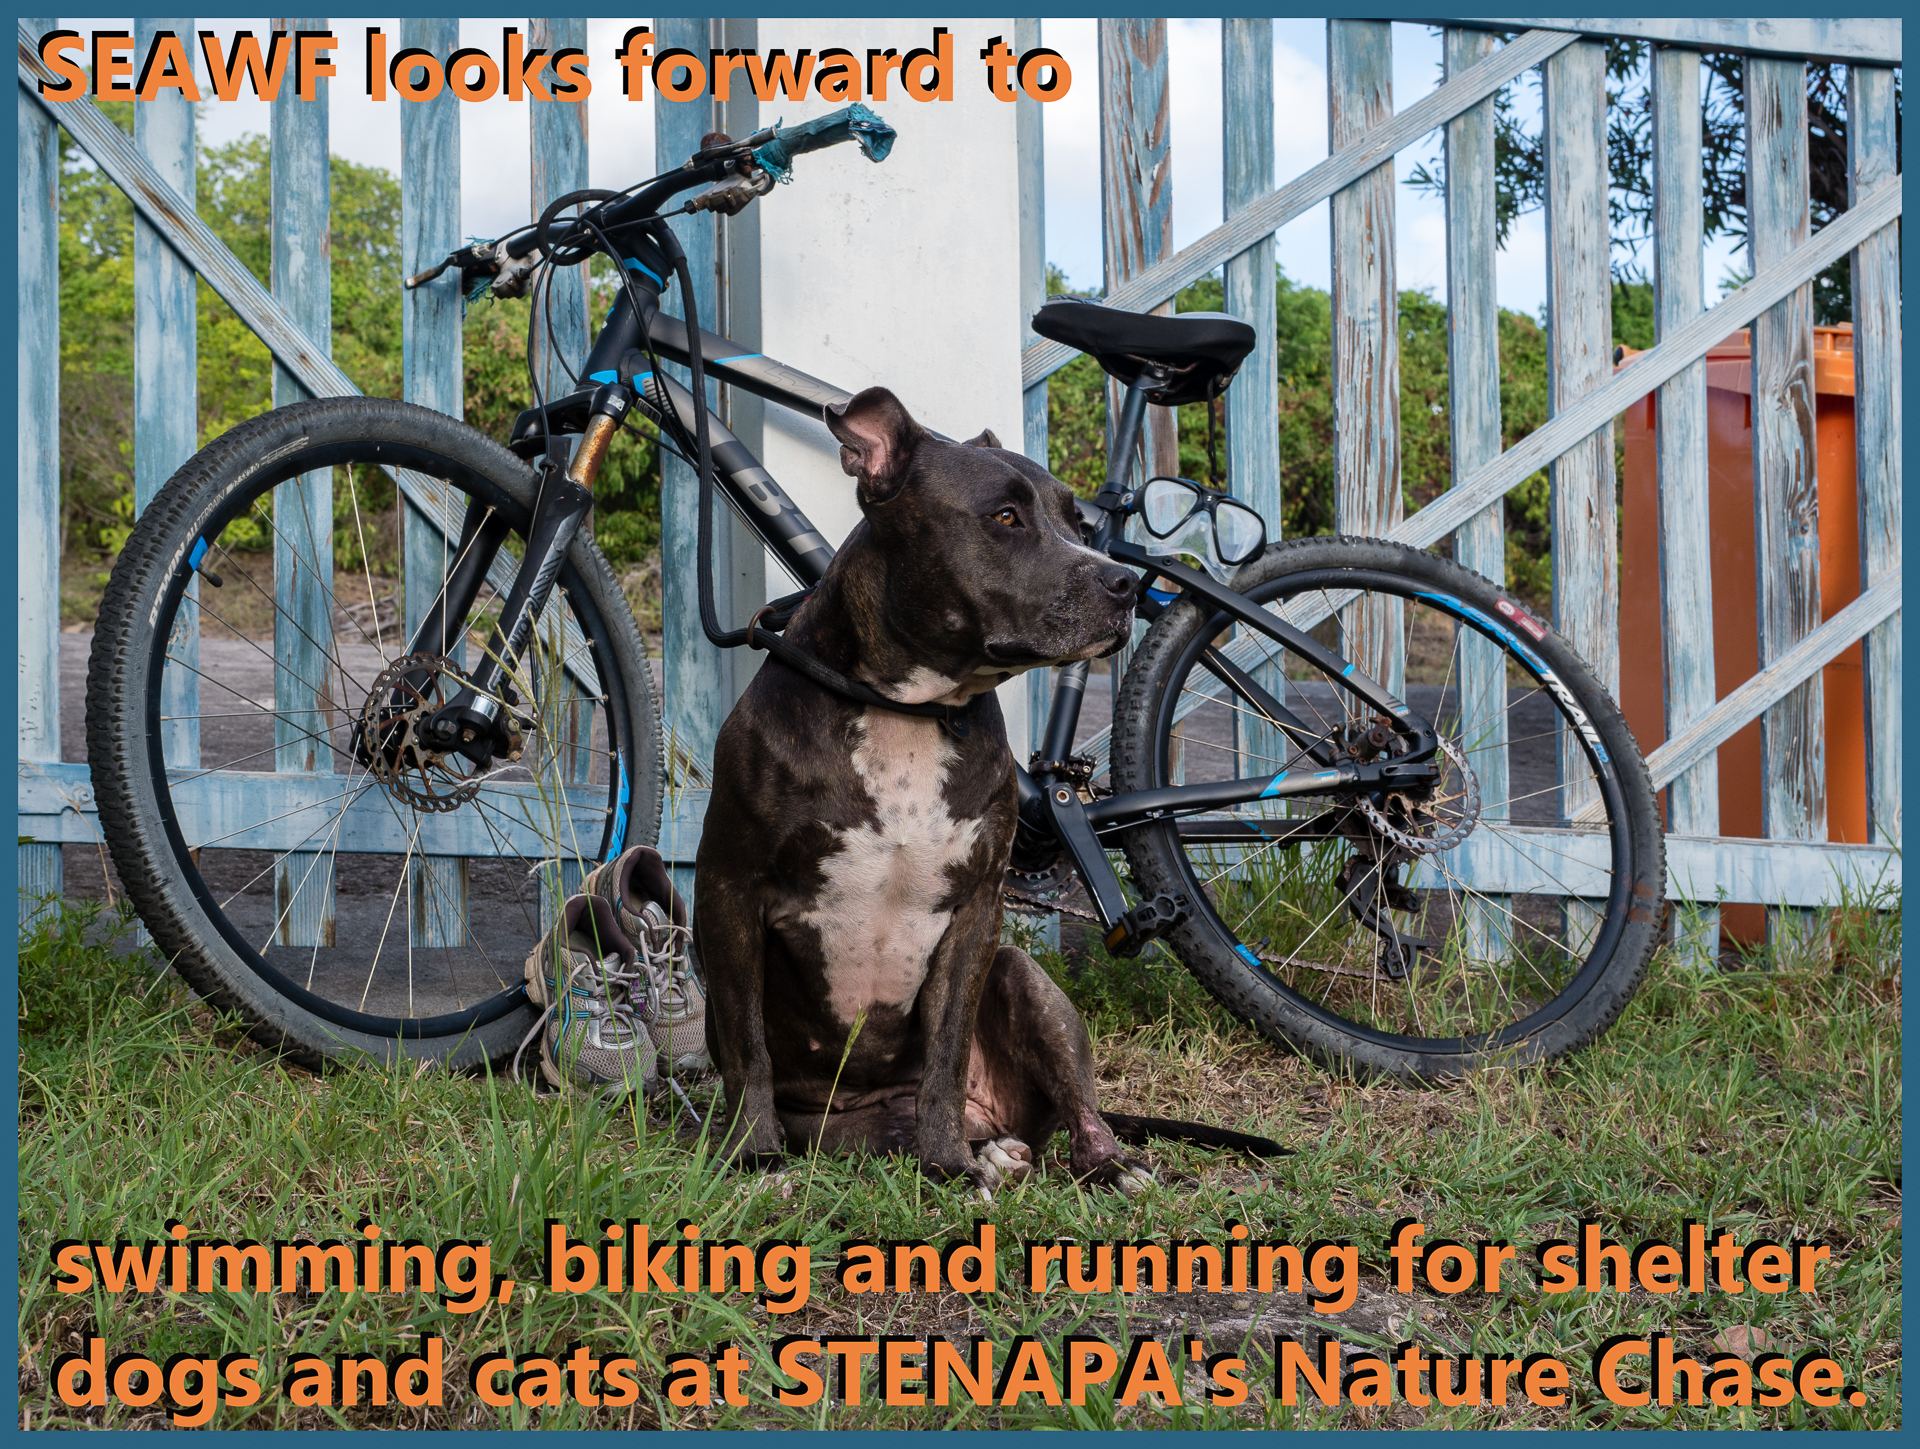 🌧 After the dark rainy days, Nicki got onto her bike again today. After all, only one week left until the National Park Nature Chase organised by STENAPA on Statia Day, Wednesday, 16th of November.

🤪 It didn't go easy ... So more training is needed to present the animal shelter to the best of our abilities. Join the chase, volunteer to help out at the event or just cheer us all on.

🤩 No matter the position and time, in the end, we are all excited to take part in this wonderful event and will do our best to enjoy nature whilst we are chasing from one national park to another. For the finish at the entry of The Quill Nationalpark, we bring the dogs of the animal shelter to celebrate with the team and get to know more nature and animal lovers on this island. 

😍 Btw, we are pretty impressed by the ones doing all three legs by themselves. We have Yoeri for the swimming, Nicki biking and Jenny running/hiking and all the love and support from the rest of the volunteers as well as the cats and dogs at the shelter.

Browse through the stories and pictures of our dogs here: https://devocean-pictures.com/animal-shelter-in-statia-adopt-a-dog/ (link in bio).

#adopt #adoptadog #adoption #adoptcats #naturechase #stenapa #triathlon #running #biking #hiking #swimming #nationalparks #statia #eustatius #adoptdontshop #caribbean #dutchcaribbean #caribbeannetherlands #animalshelter #statiaday #November2022 #training #statiatourism #rainyday #lookforward #devotion #devocean #seawf #animalshelter #smokey